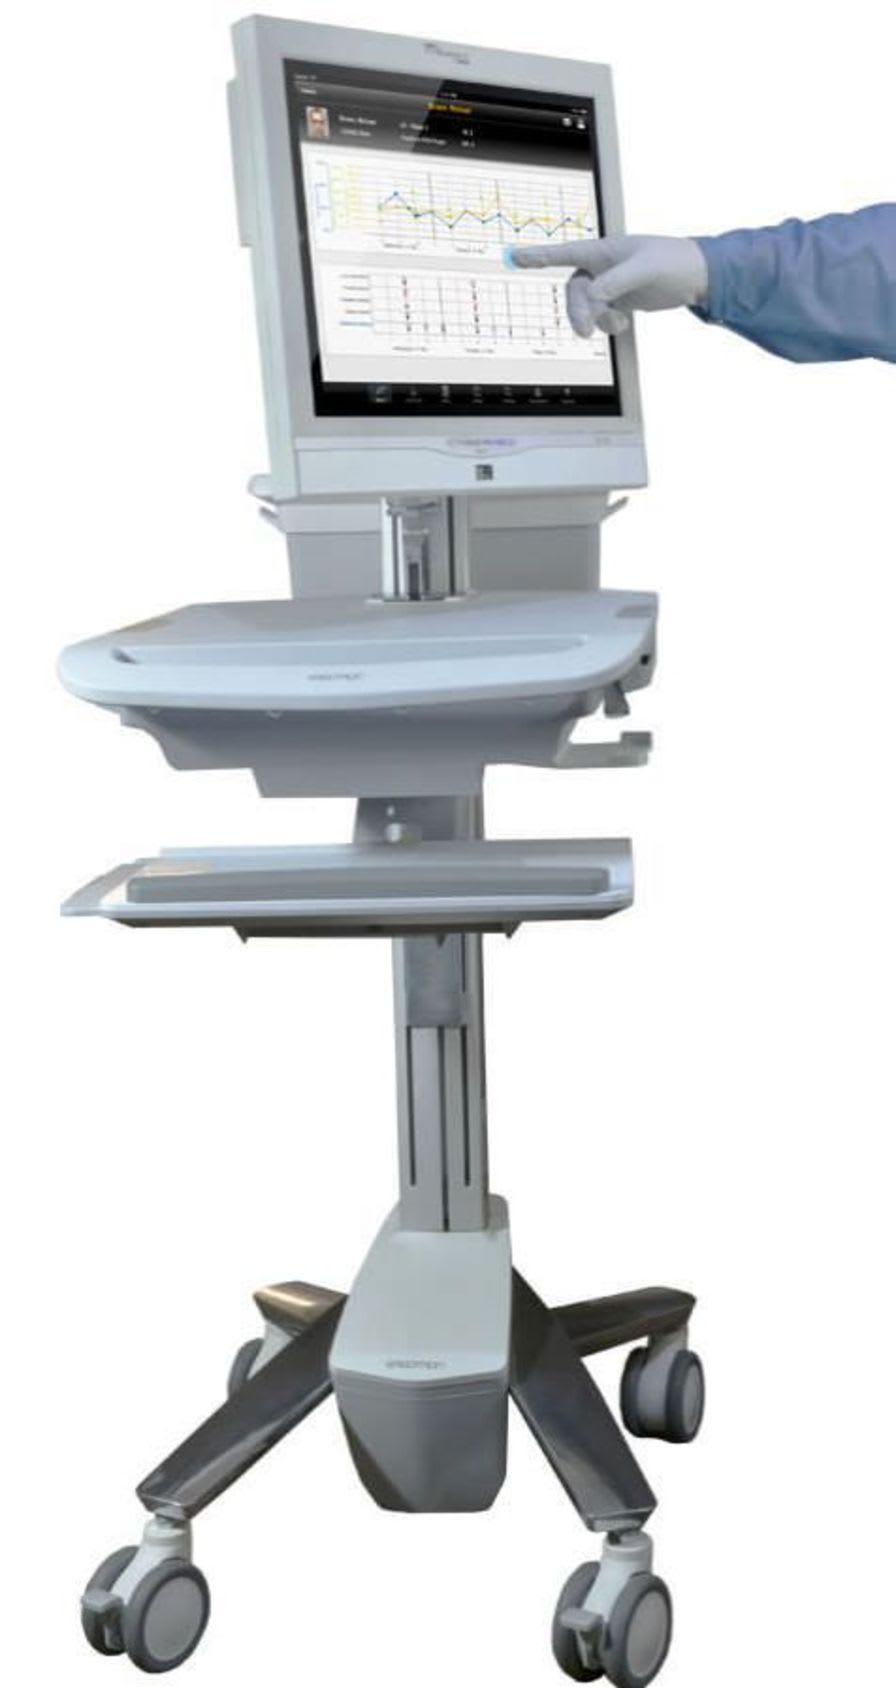 Medical panel PC with touchscreen / antibacterial / fanless CyberMed N19 Cybernet